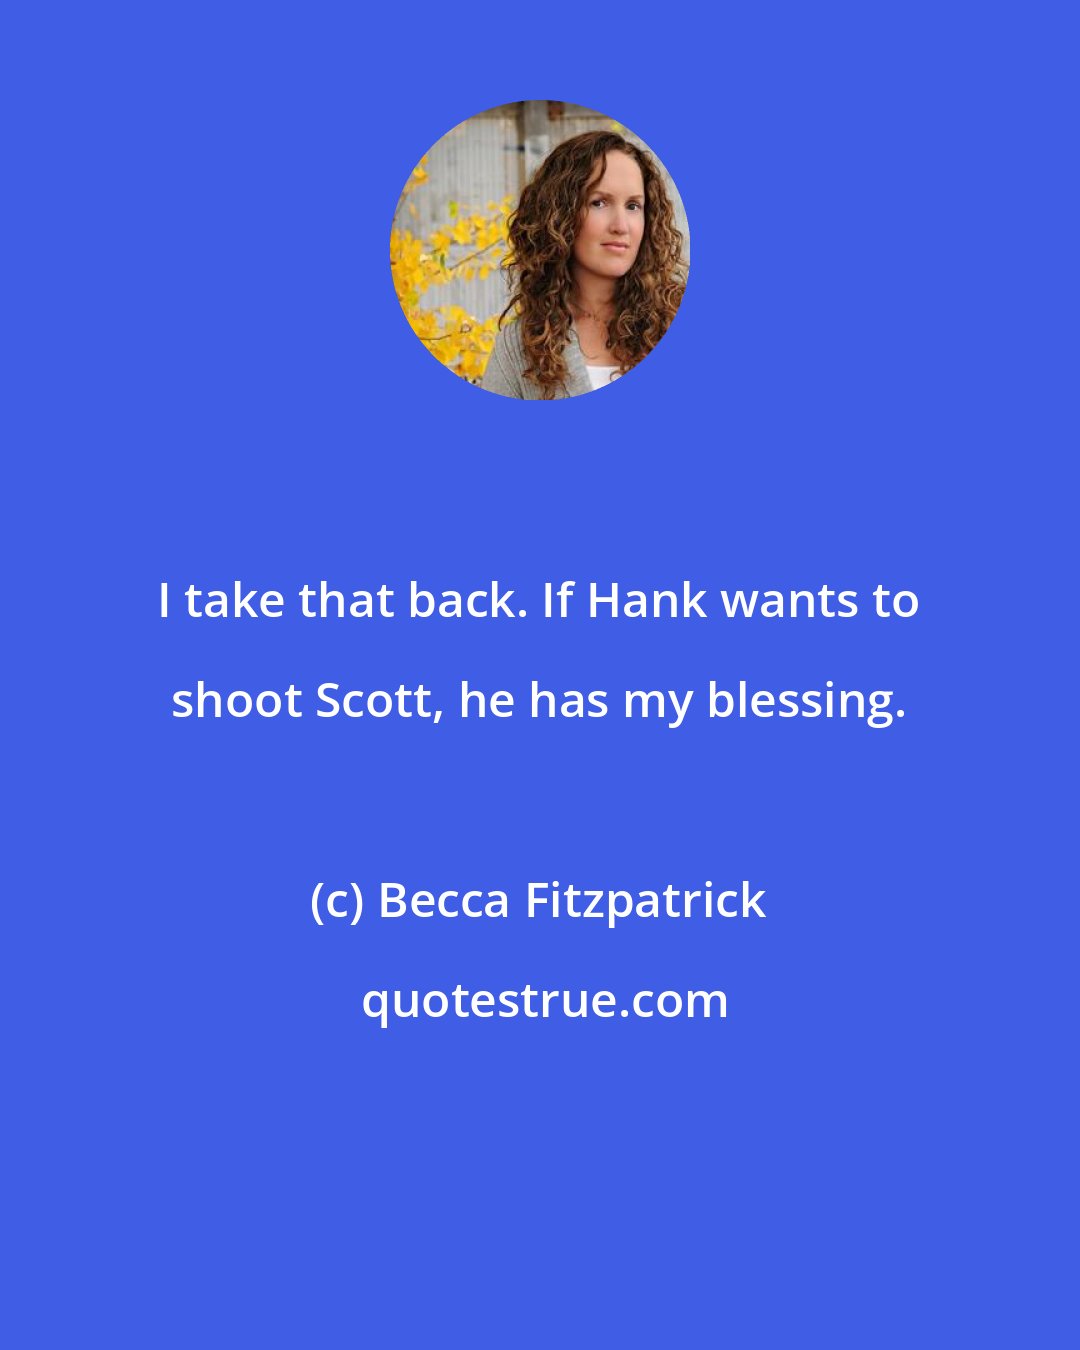 Becca Fitzpatrick: I take that back. If Hank wants to shoot Scott, he has my blessing.